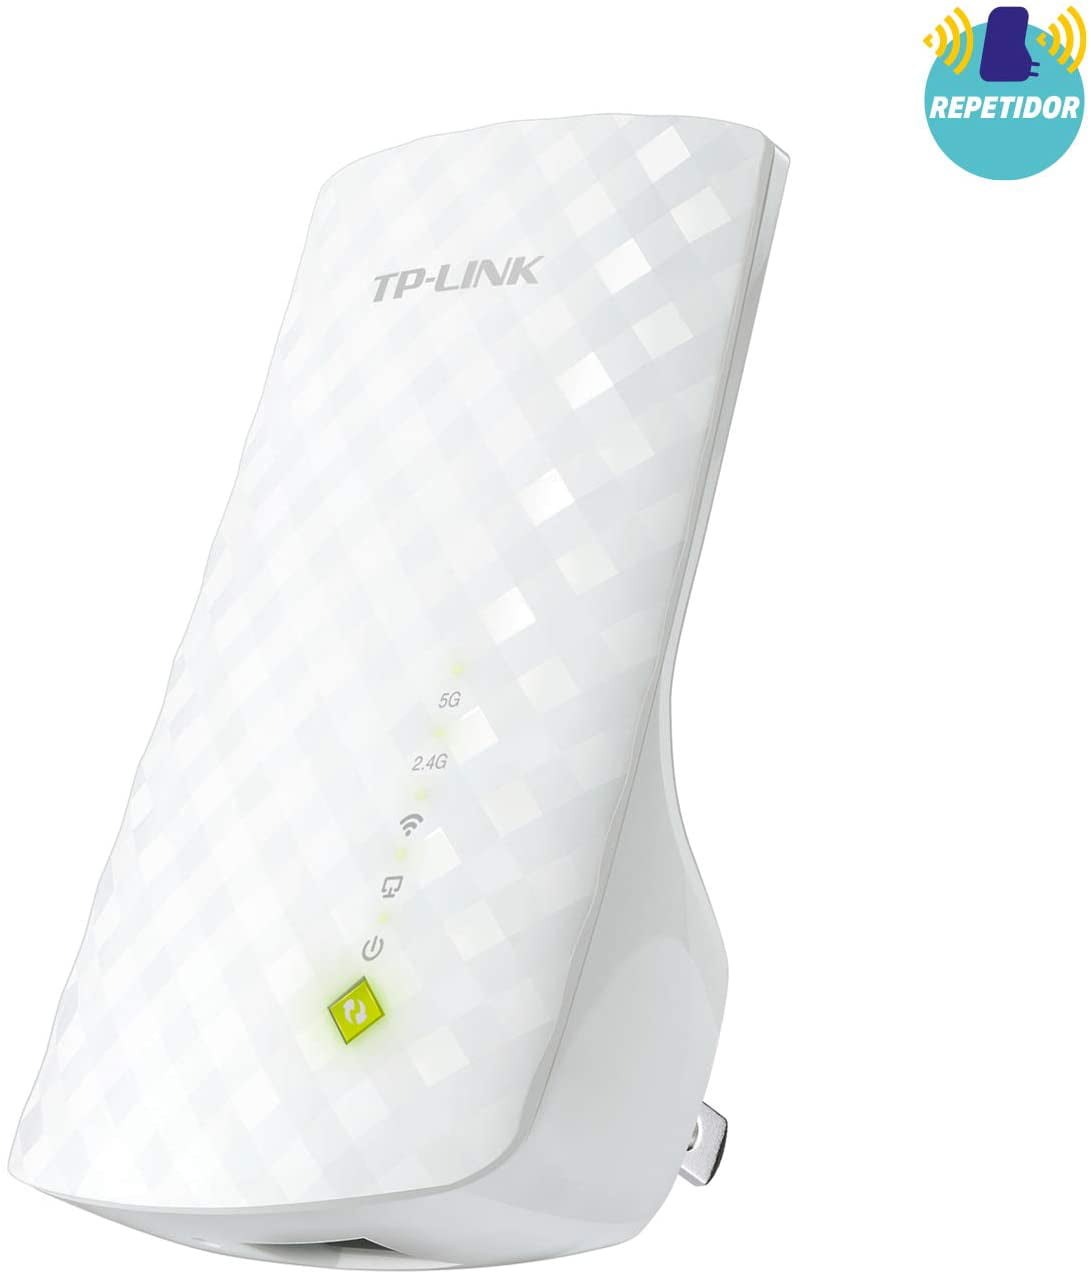 TP-Link AC750 Dual Band WiFi Range Extender,Repeater,Access Point 